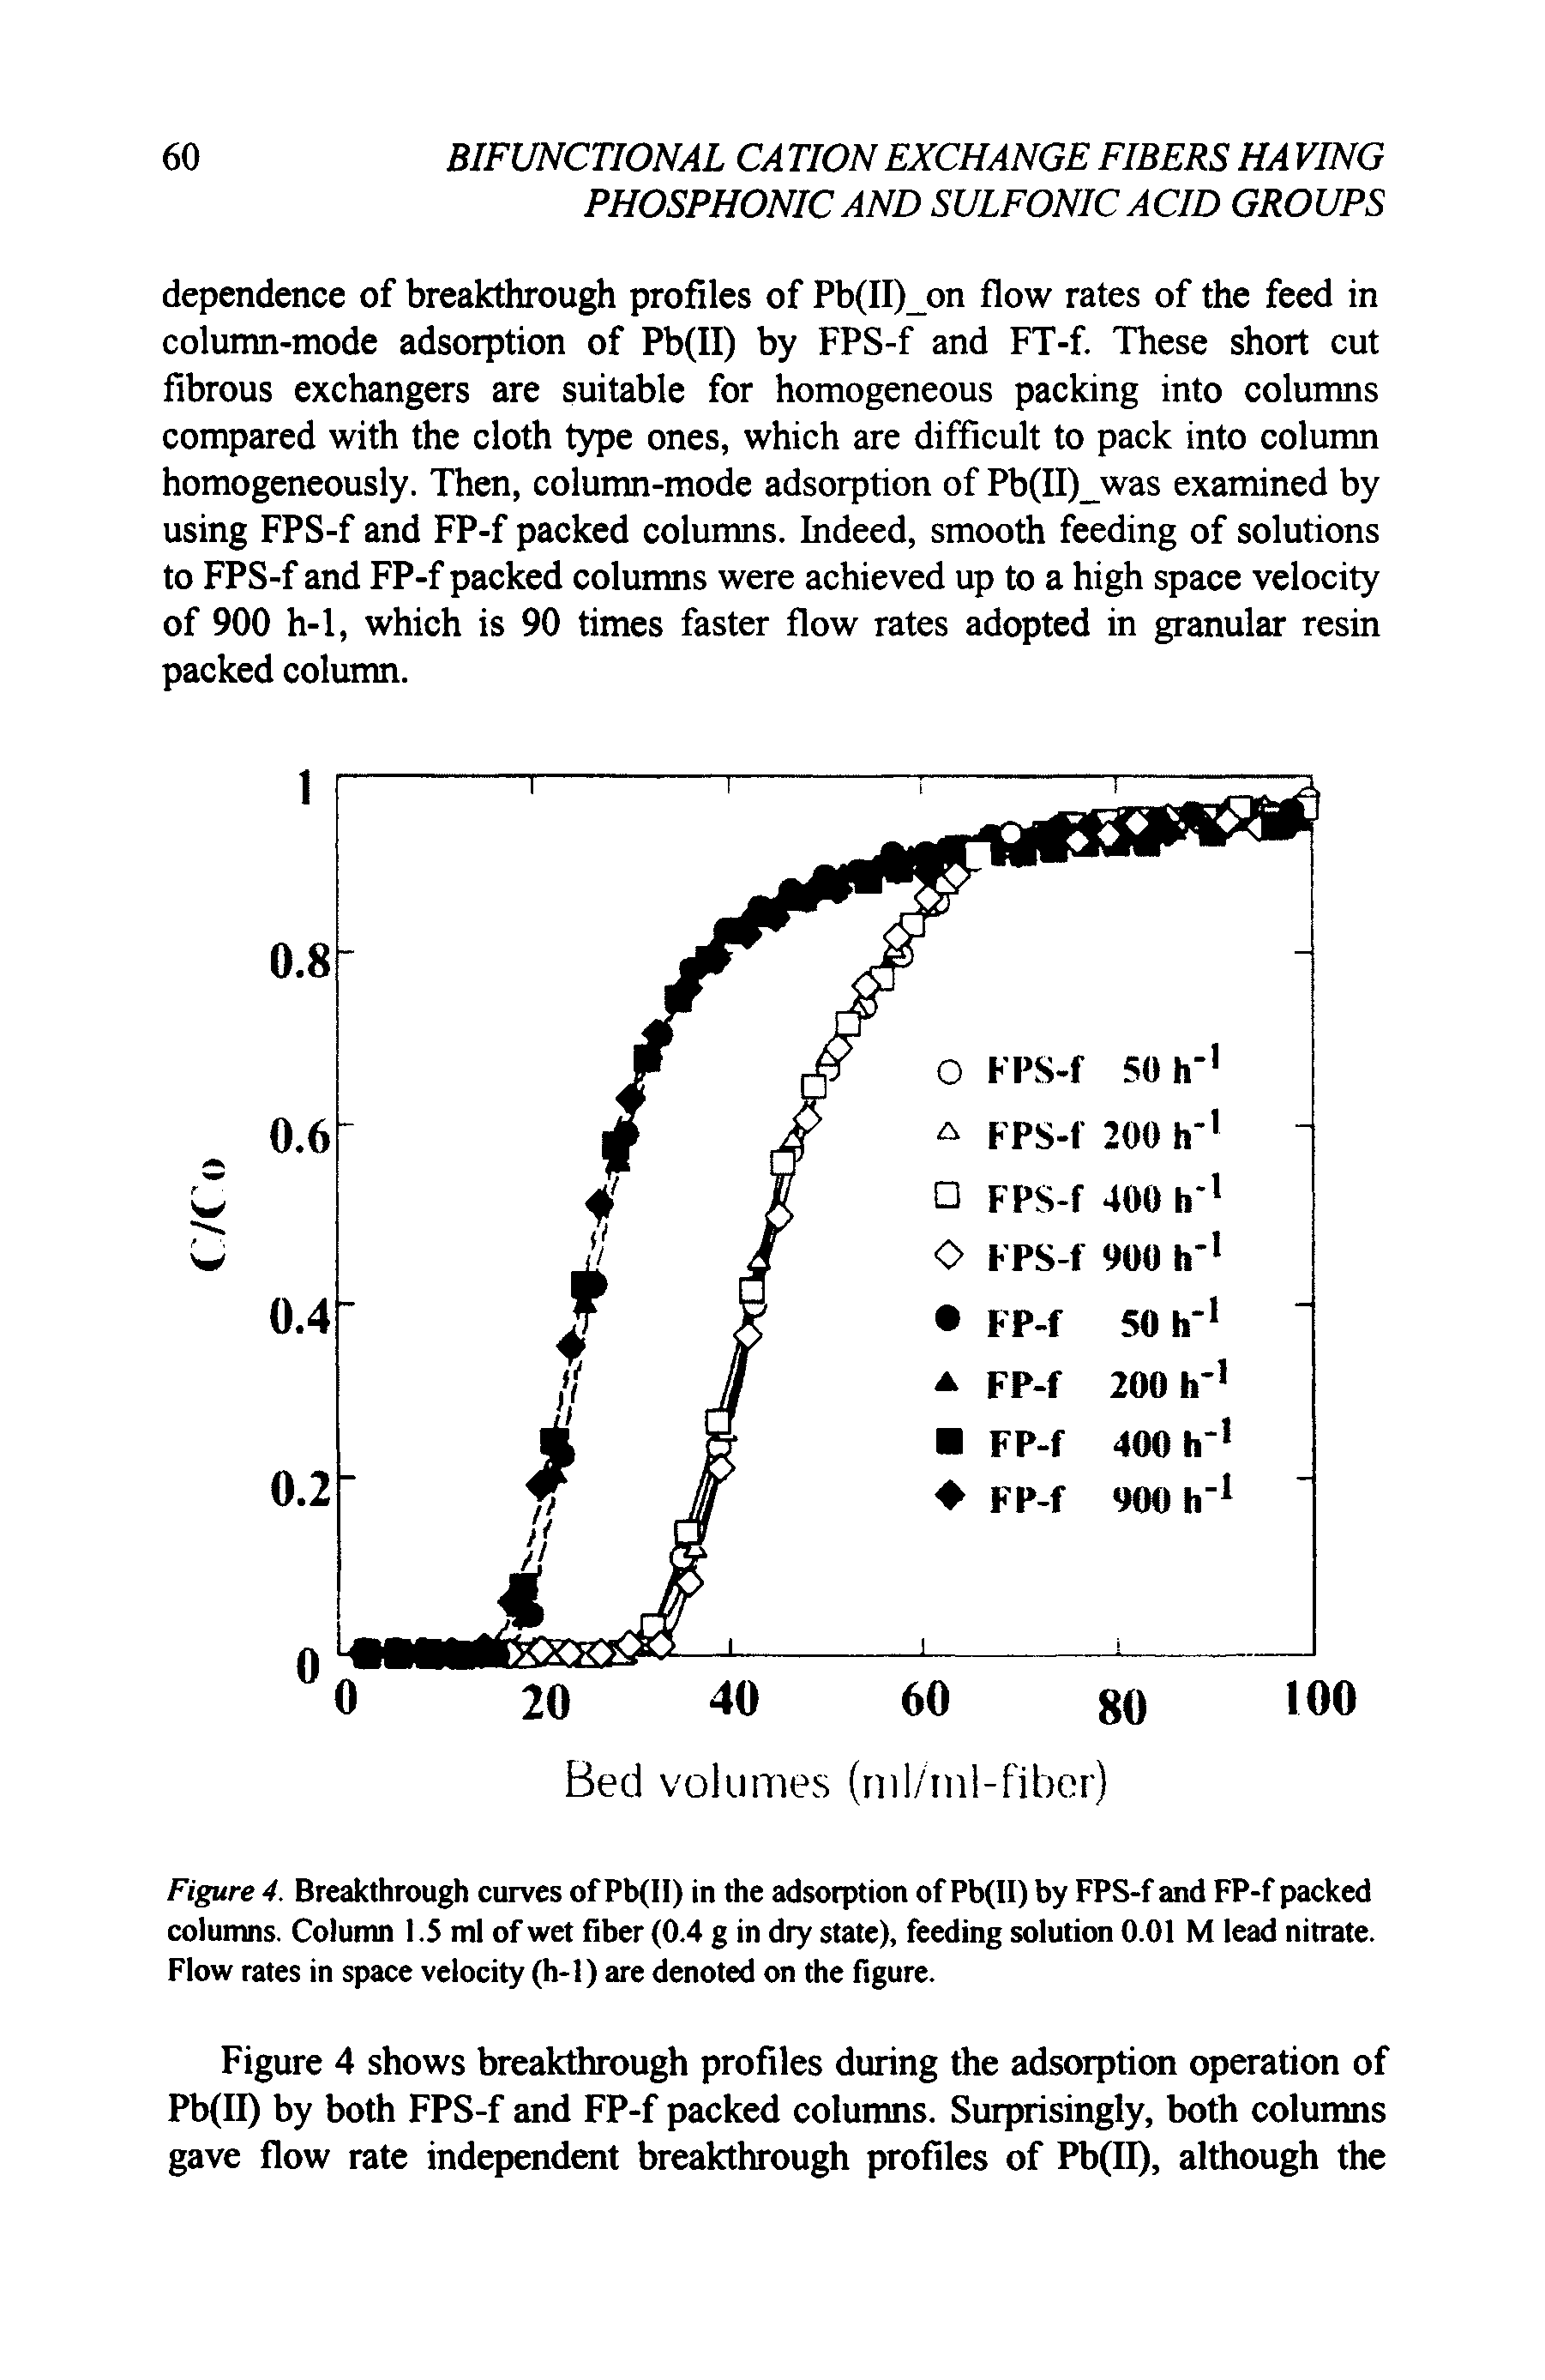 Figure 4. Breakthrough curves of Pb(II) in the adsorption of Pb(II) by FPS-f and FP-f packed columns. Column 1.5 ml of wet fiber (0.4 g in dry state), feeding solution 0.01 M lead nitrate. Flow rates in space velocity (h-1) are denoted on the figure.